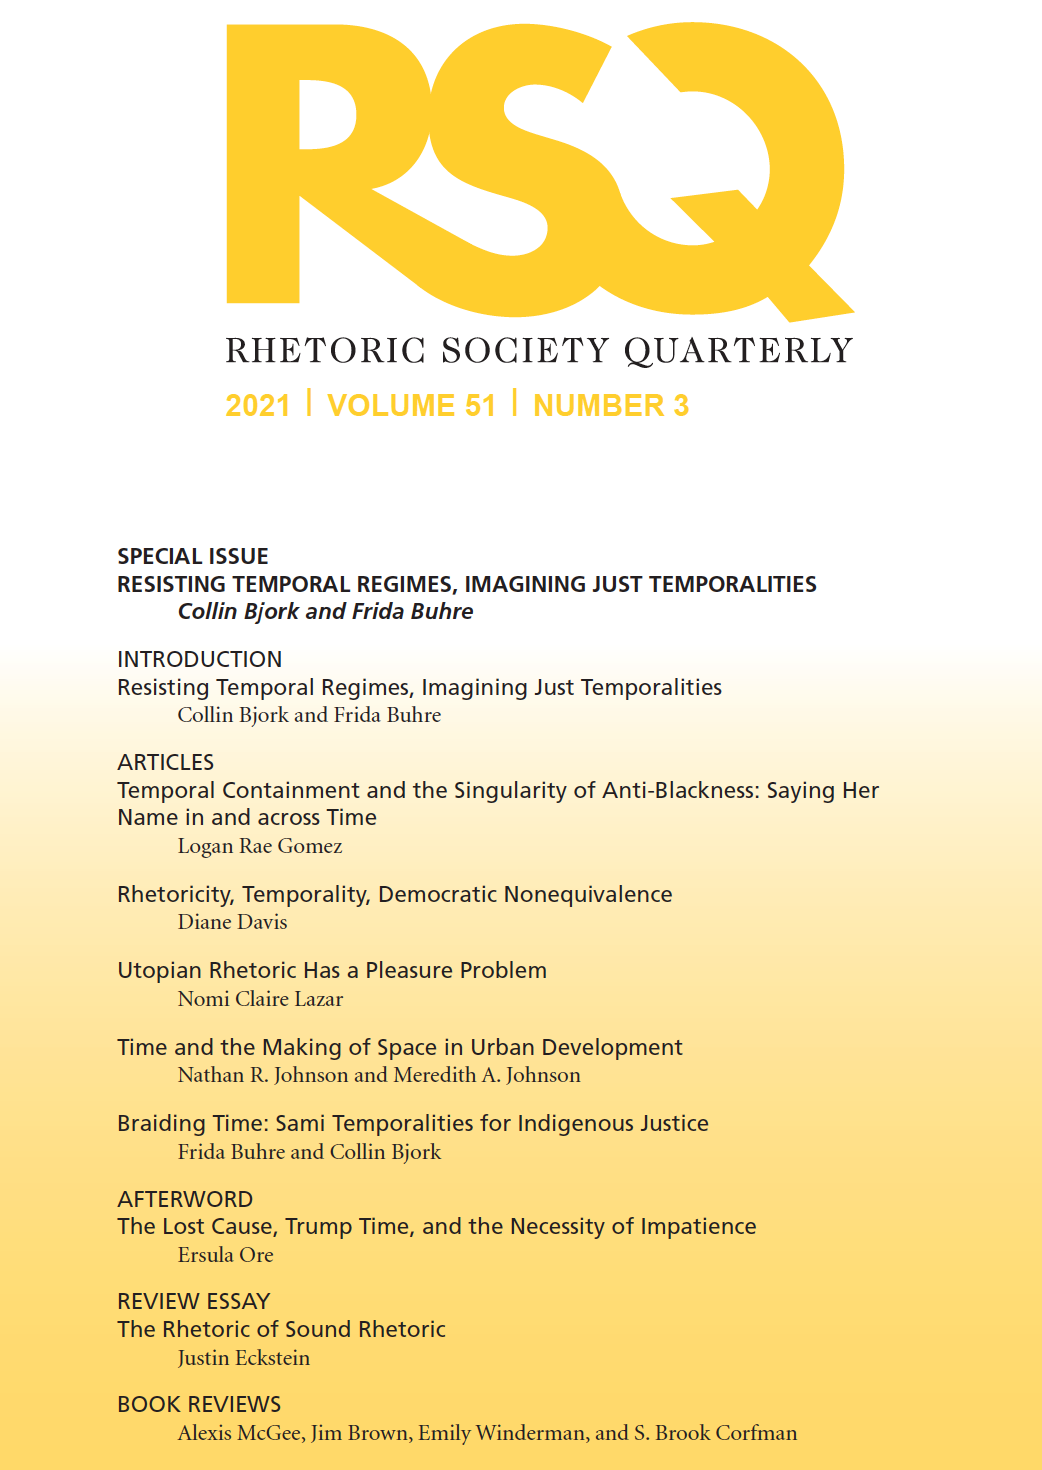 Cover of special issue of Rhetoric Society Quarterly by Collin Bjork and Frida Buhre. Black text on yellow and white gradient background.